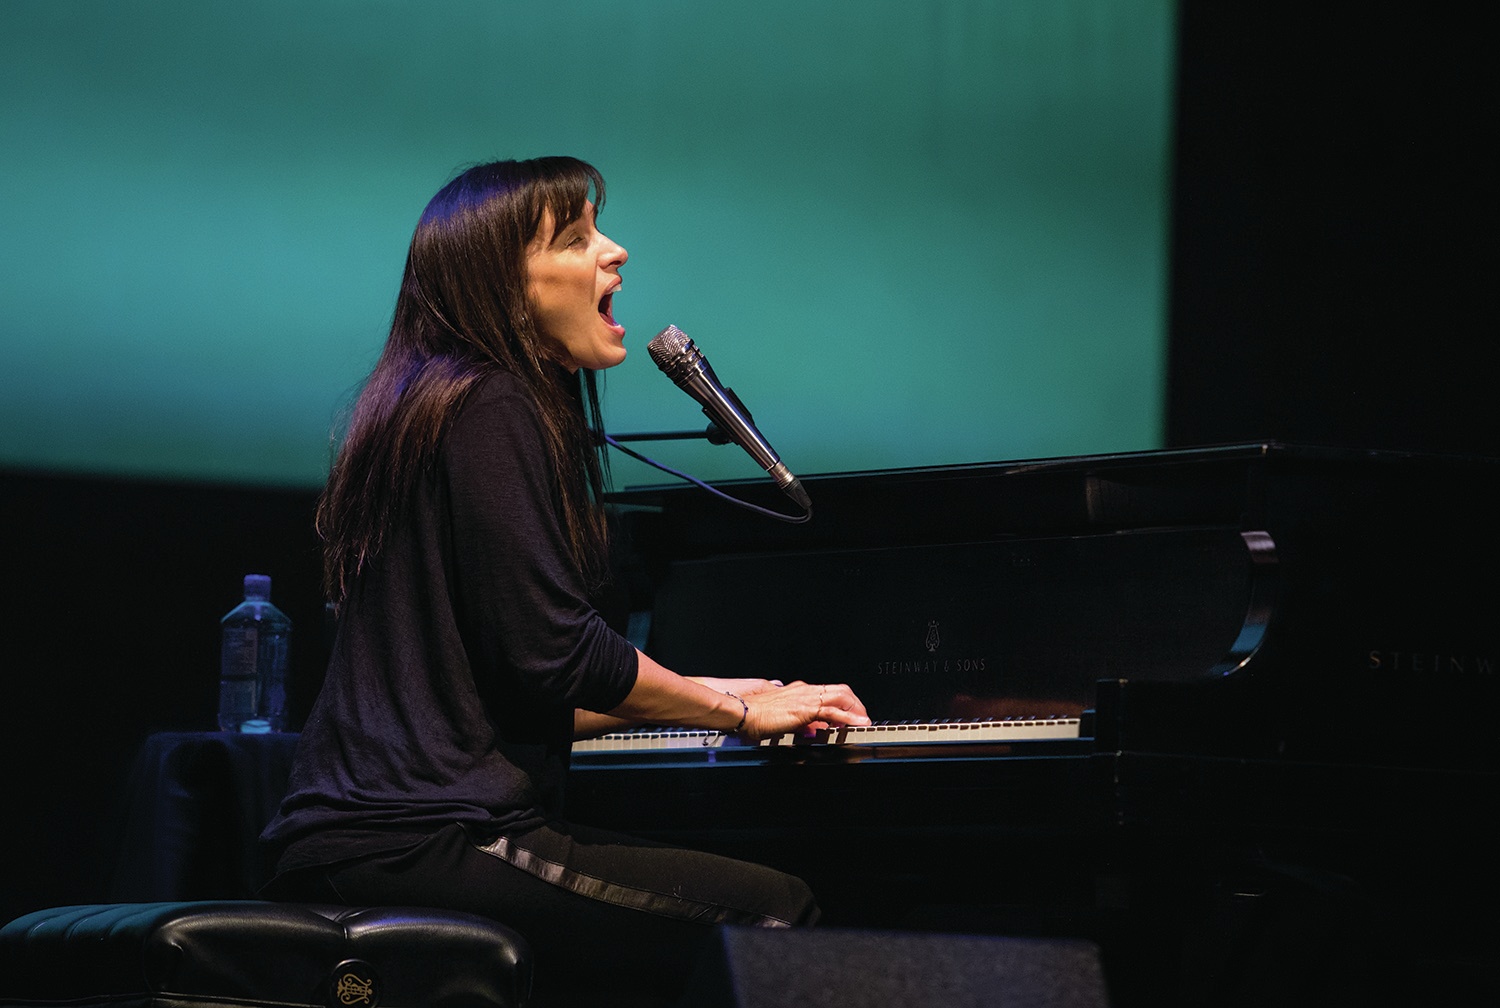 TRUE TALENT - Chantal Kreviazuk performed at the Red Deer College Arts Centre on Monday to a sold out crowd. The Canadian singer-songwriter is on her first tour in seven years and was performing songs from her new album